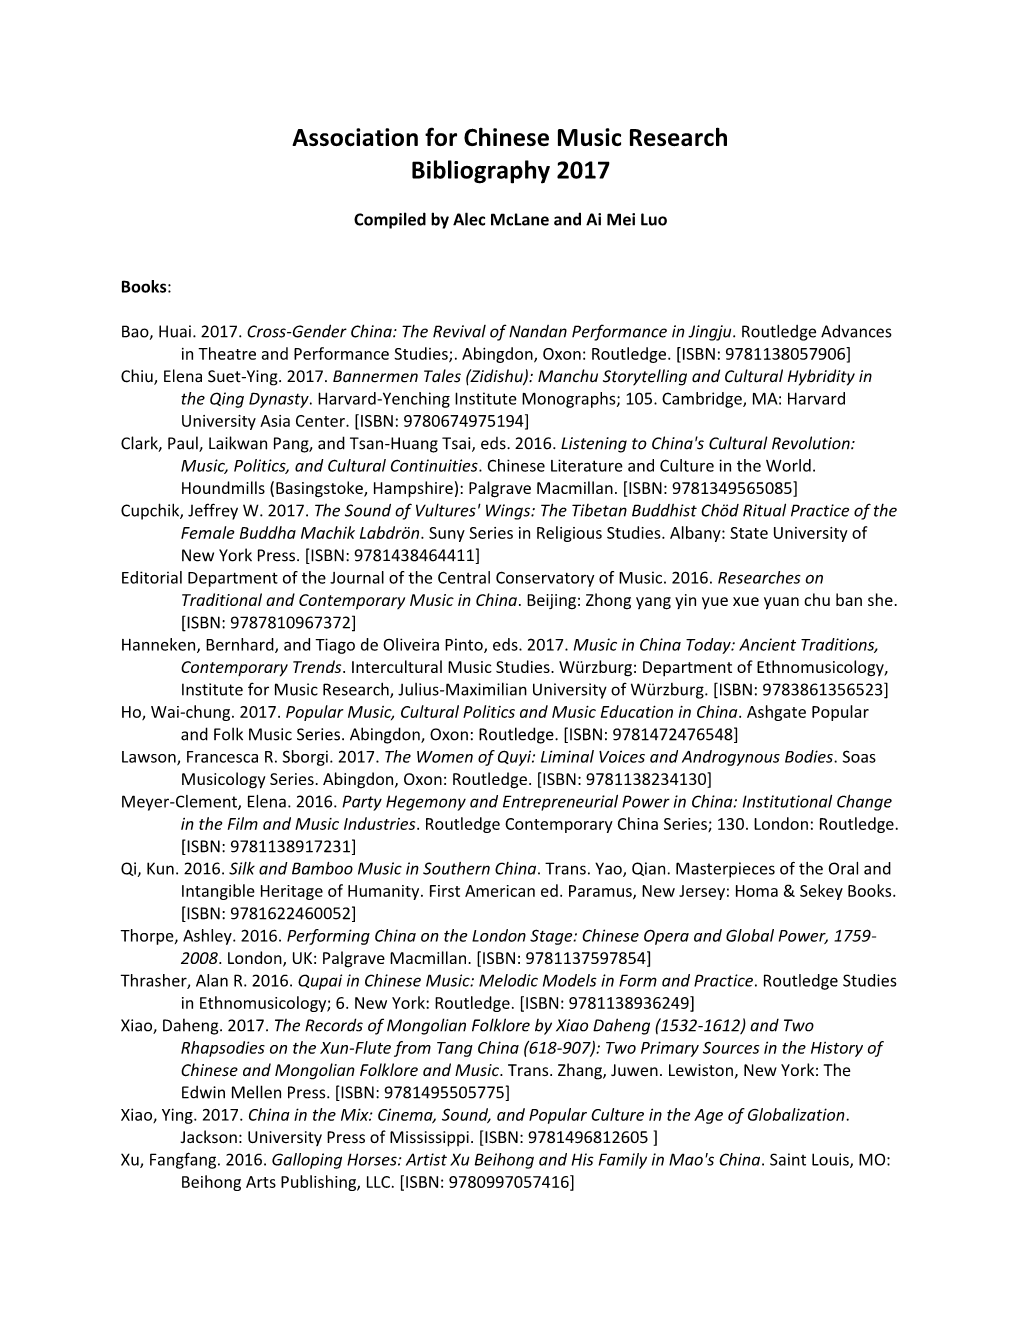 Association for Chinese Music Research Bibliography 2017